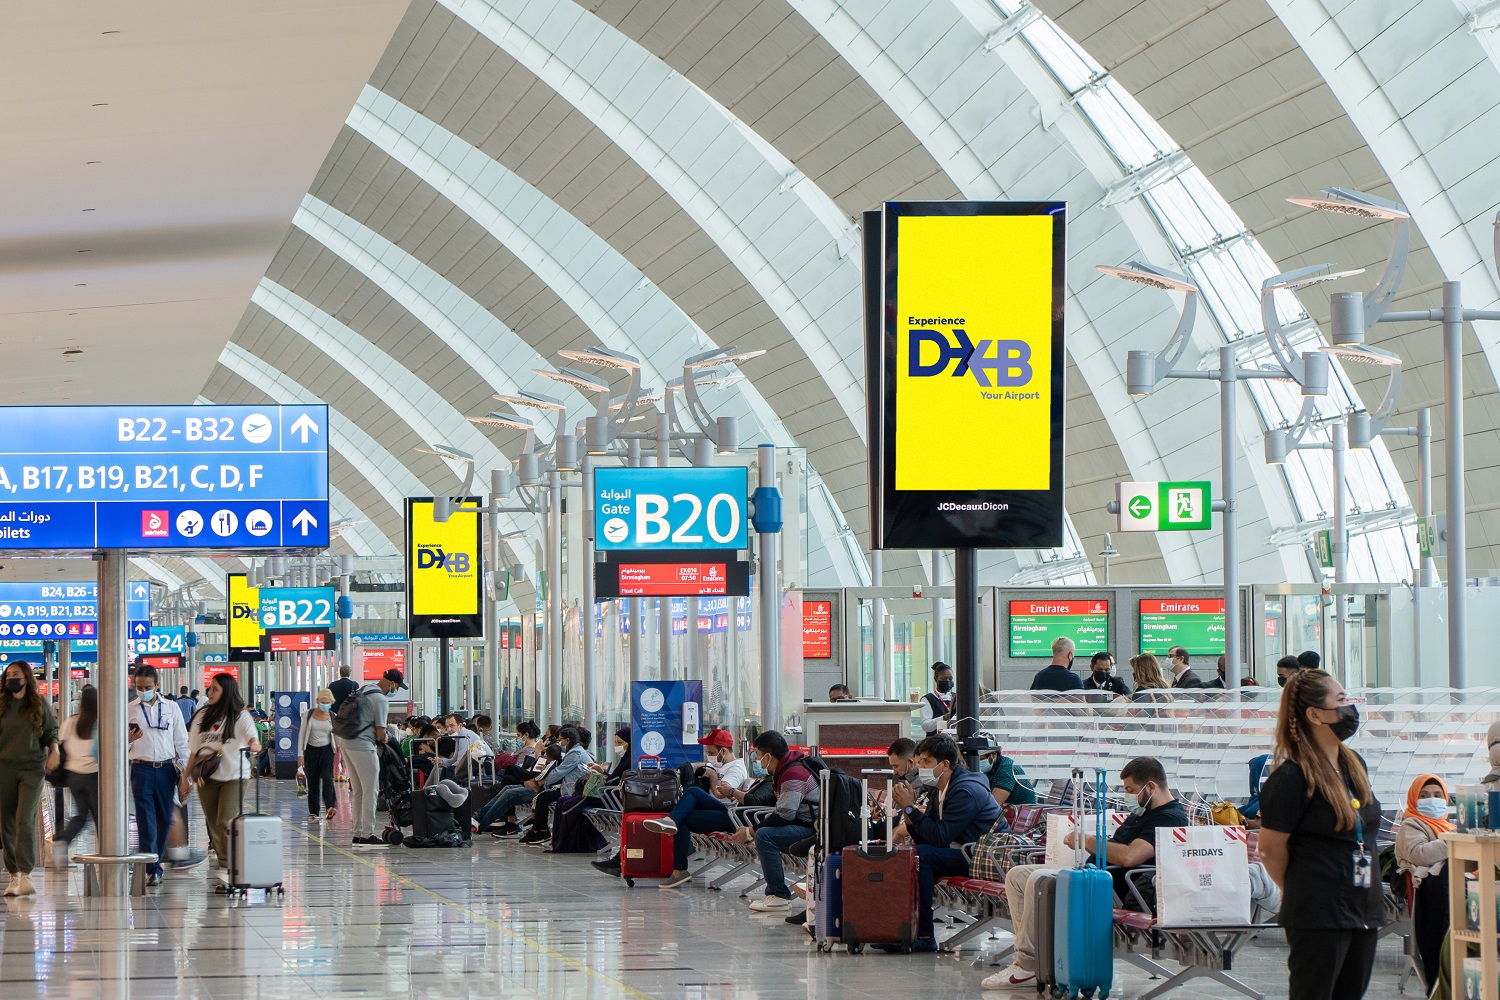 Dubai International Airport achieves a significant increase in the number of passengers, receiving 27.9 million passengers